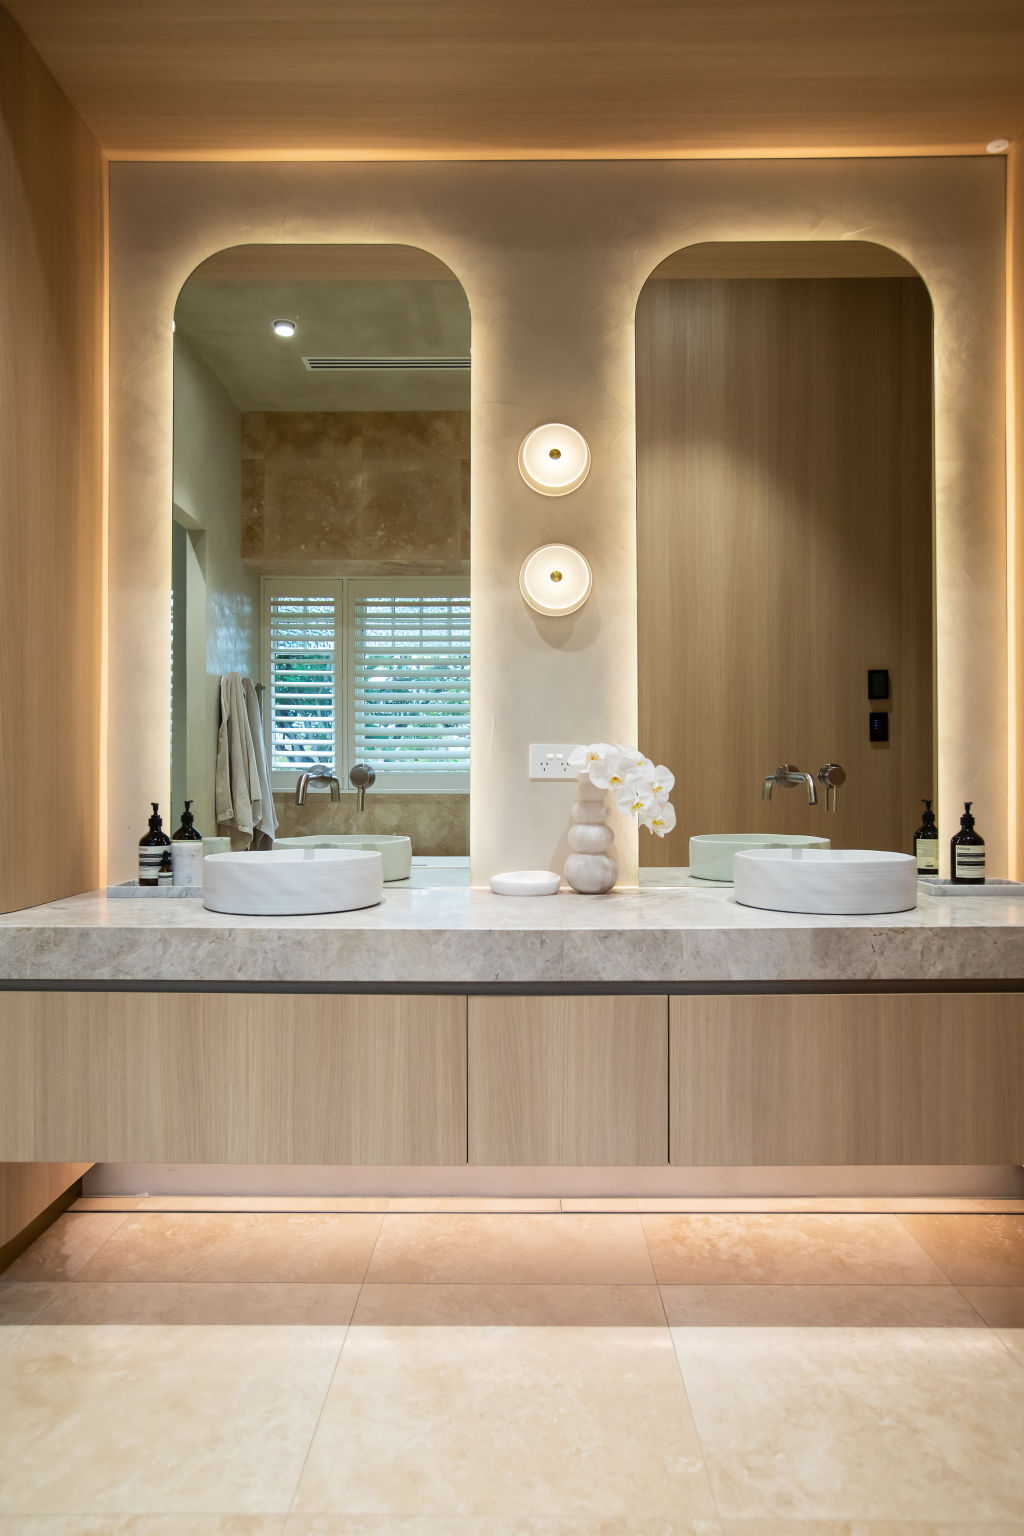 The en suite featuring Soktas hand-blown lighting, fluted glass and steel doors, and circular concrete basins. Photo: JOSIE WITHERS